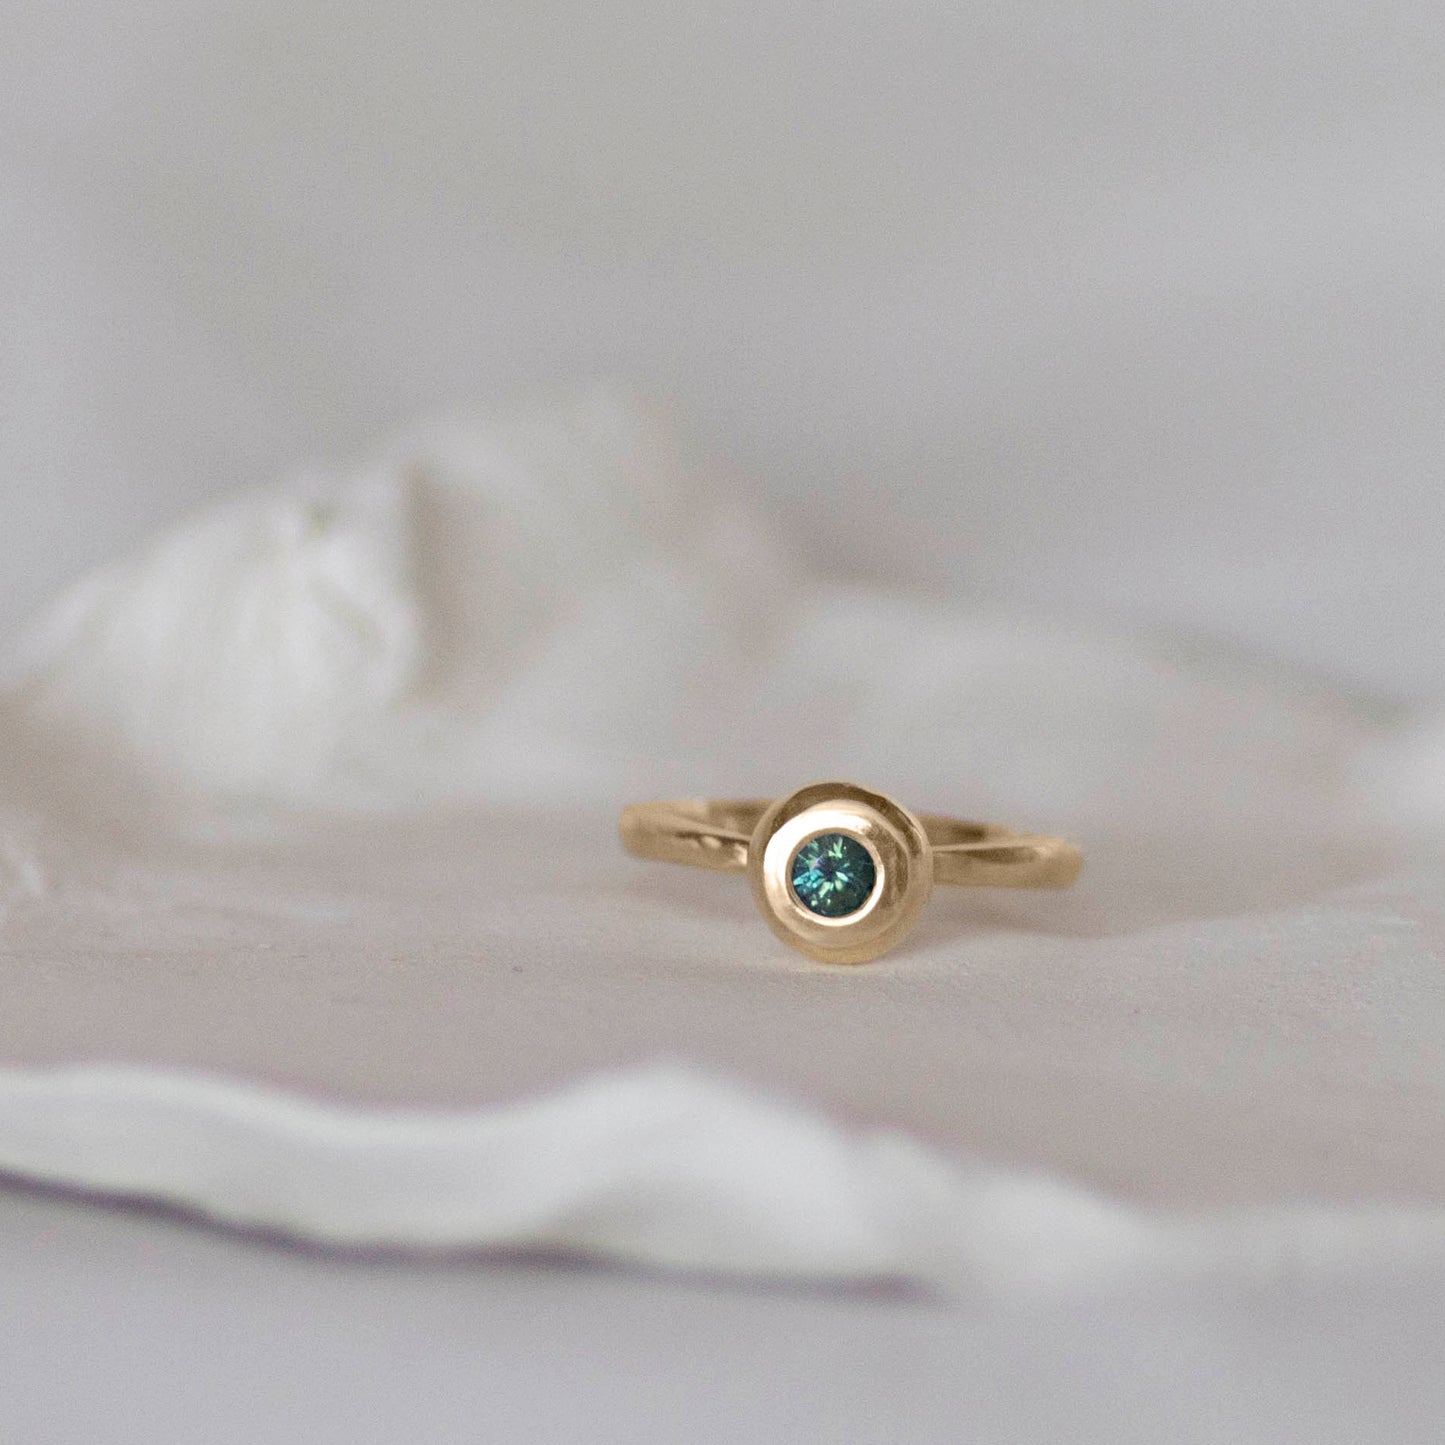 Australian Blue/Green Parti Sapphire set in a heavy, 14ct yellow gold ring sitting on a white ceramic dish by jane finch